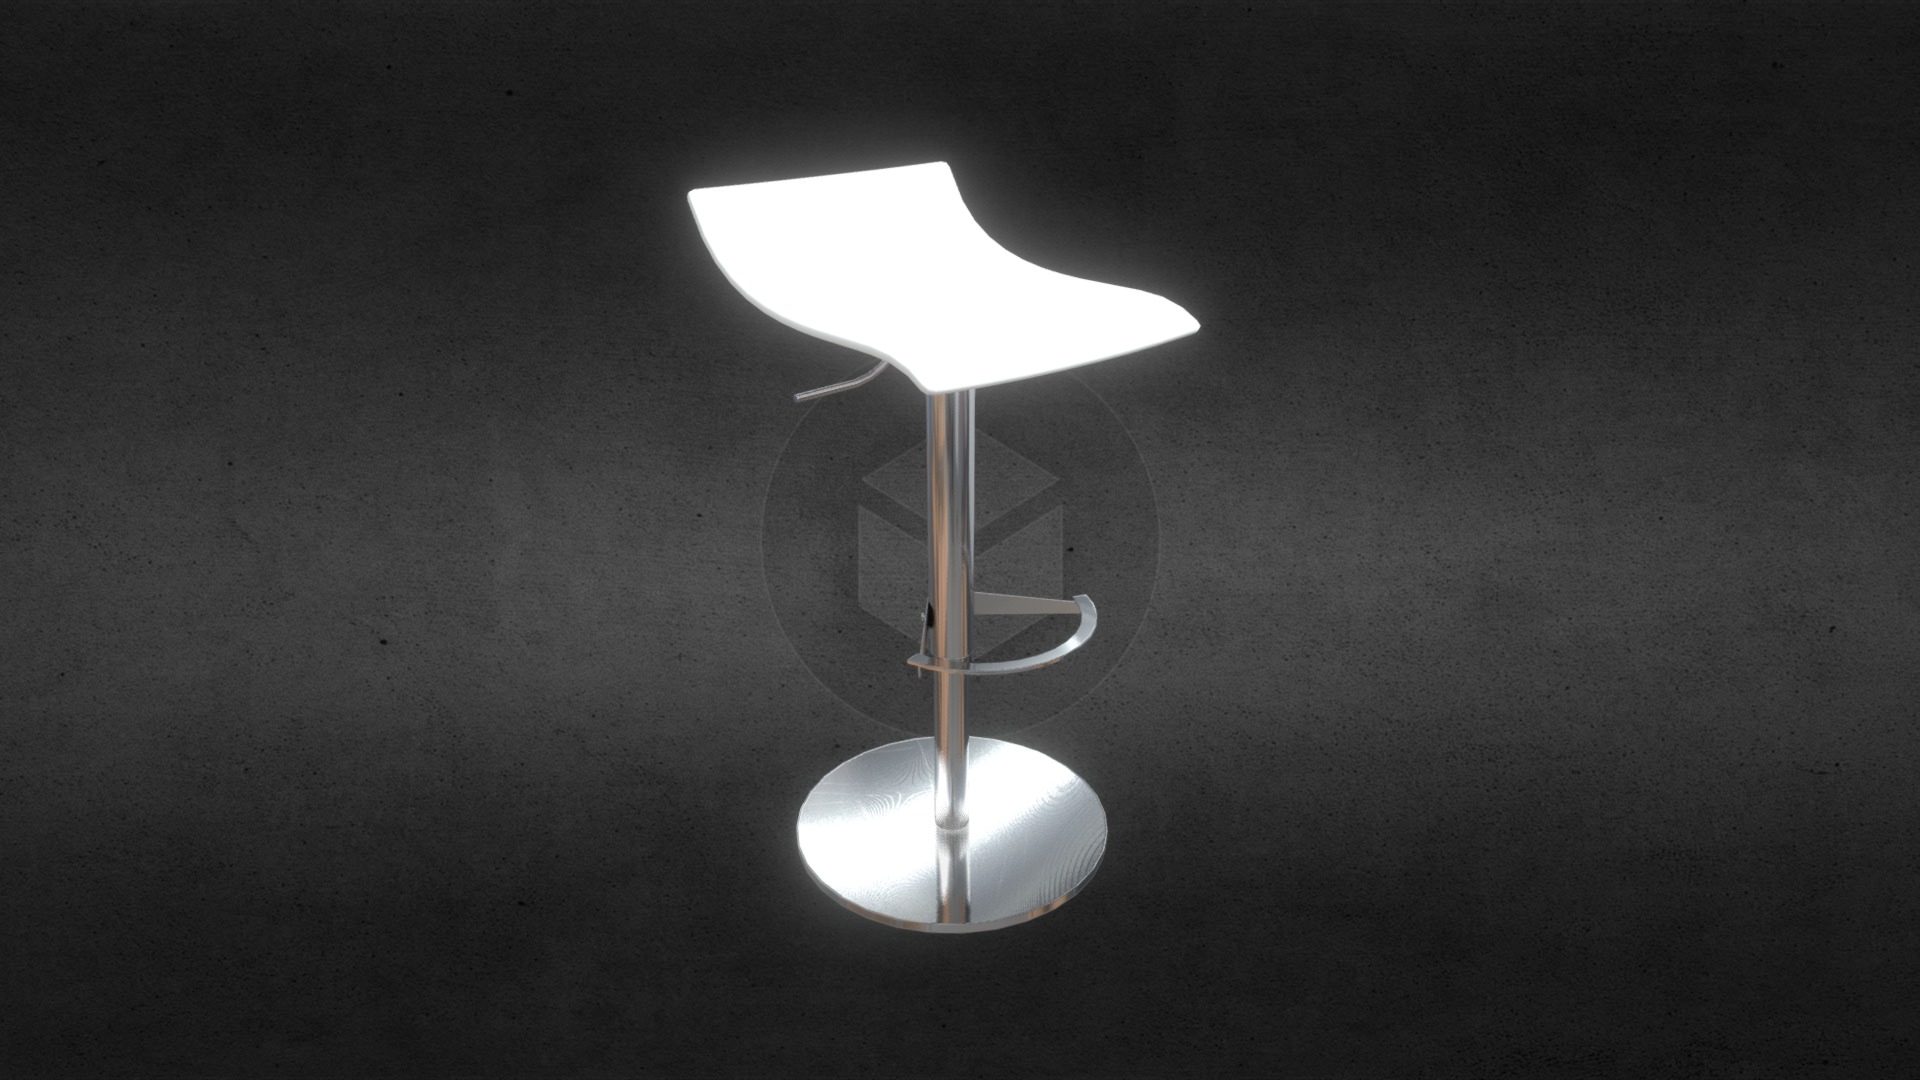 3D model X-Treme-B Barstool - This is a 3D model of the X-Treme-B Barstool. The 3D model is about a light bulb on a table.